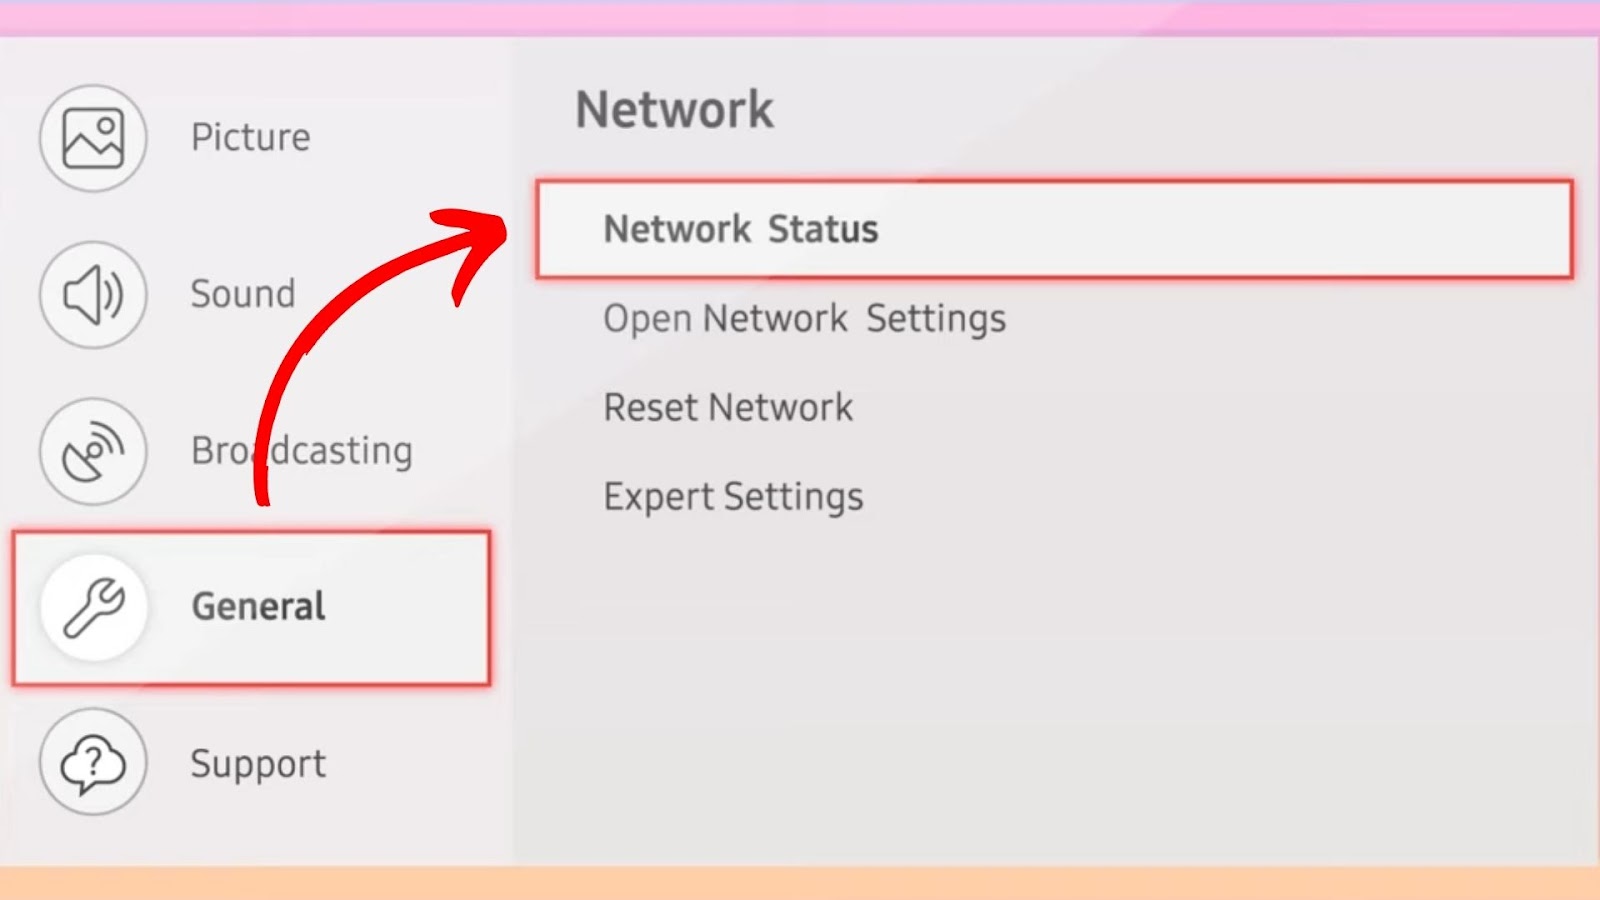 How to Test Network on a Samsung TV